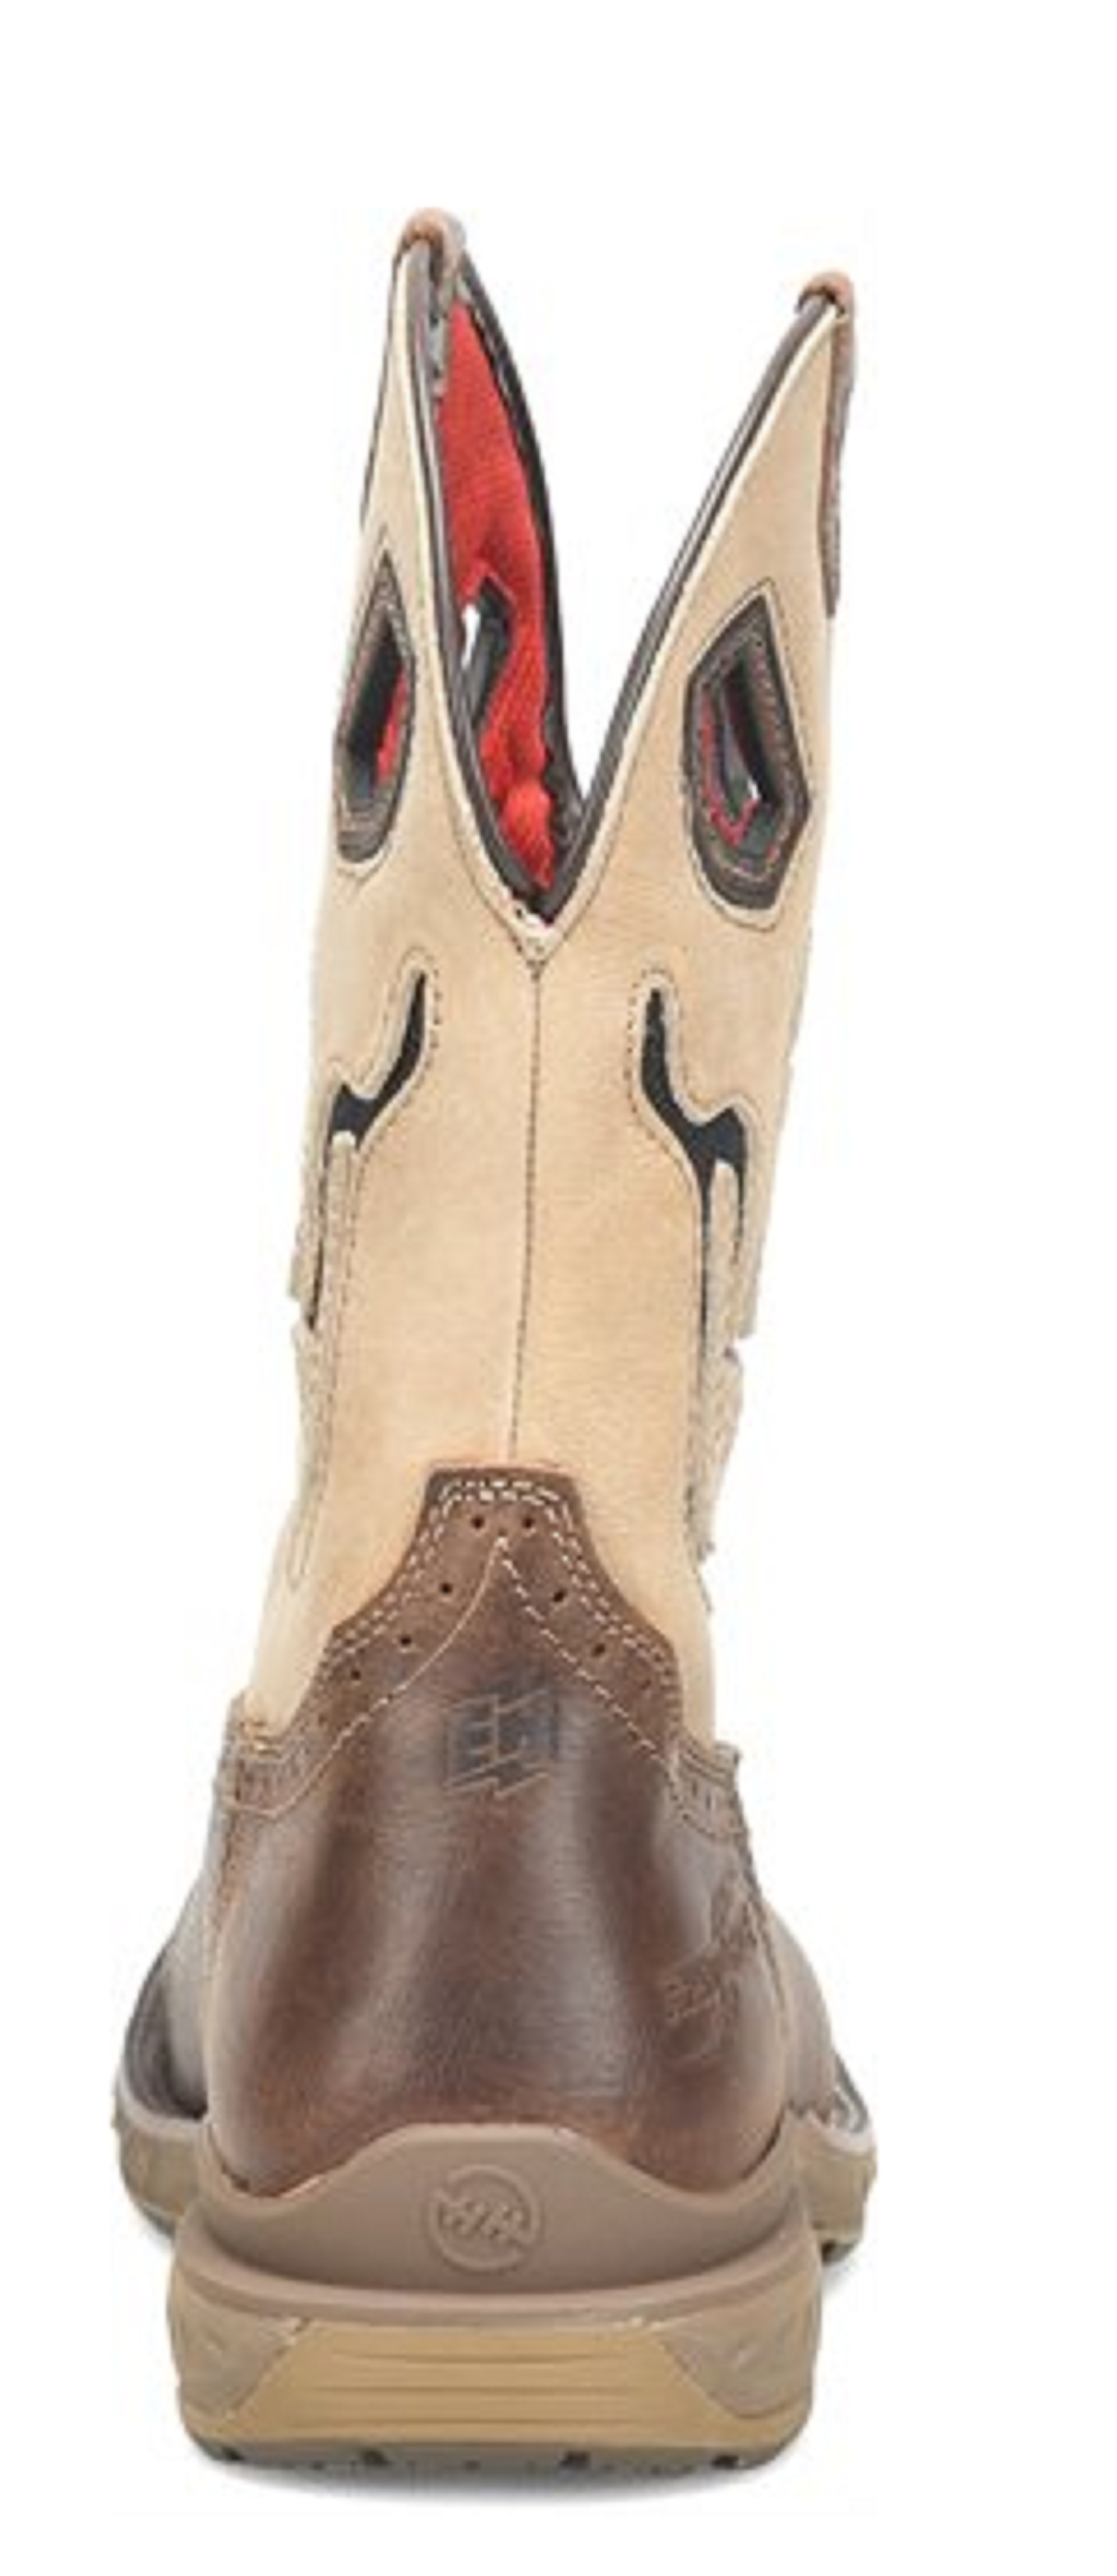 Double H 'Syphon' Men's Oil & Slip Resist. EH Soft Toe Pull-On Boot DH5389